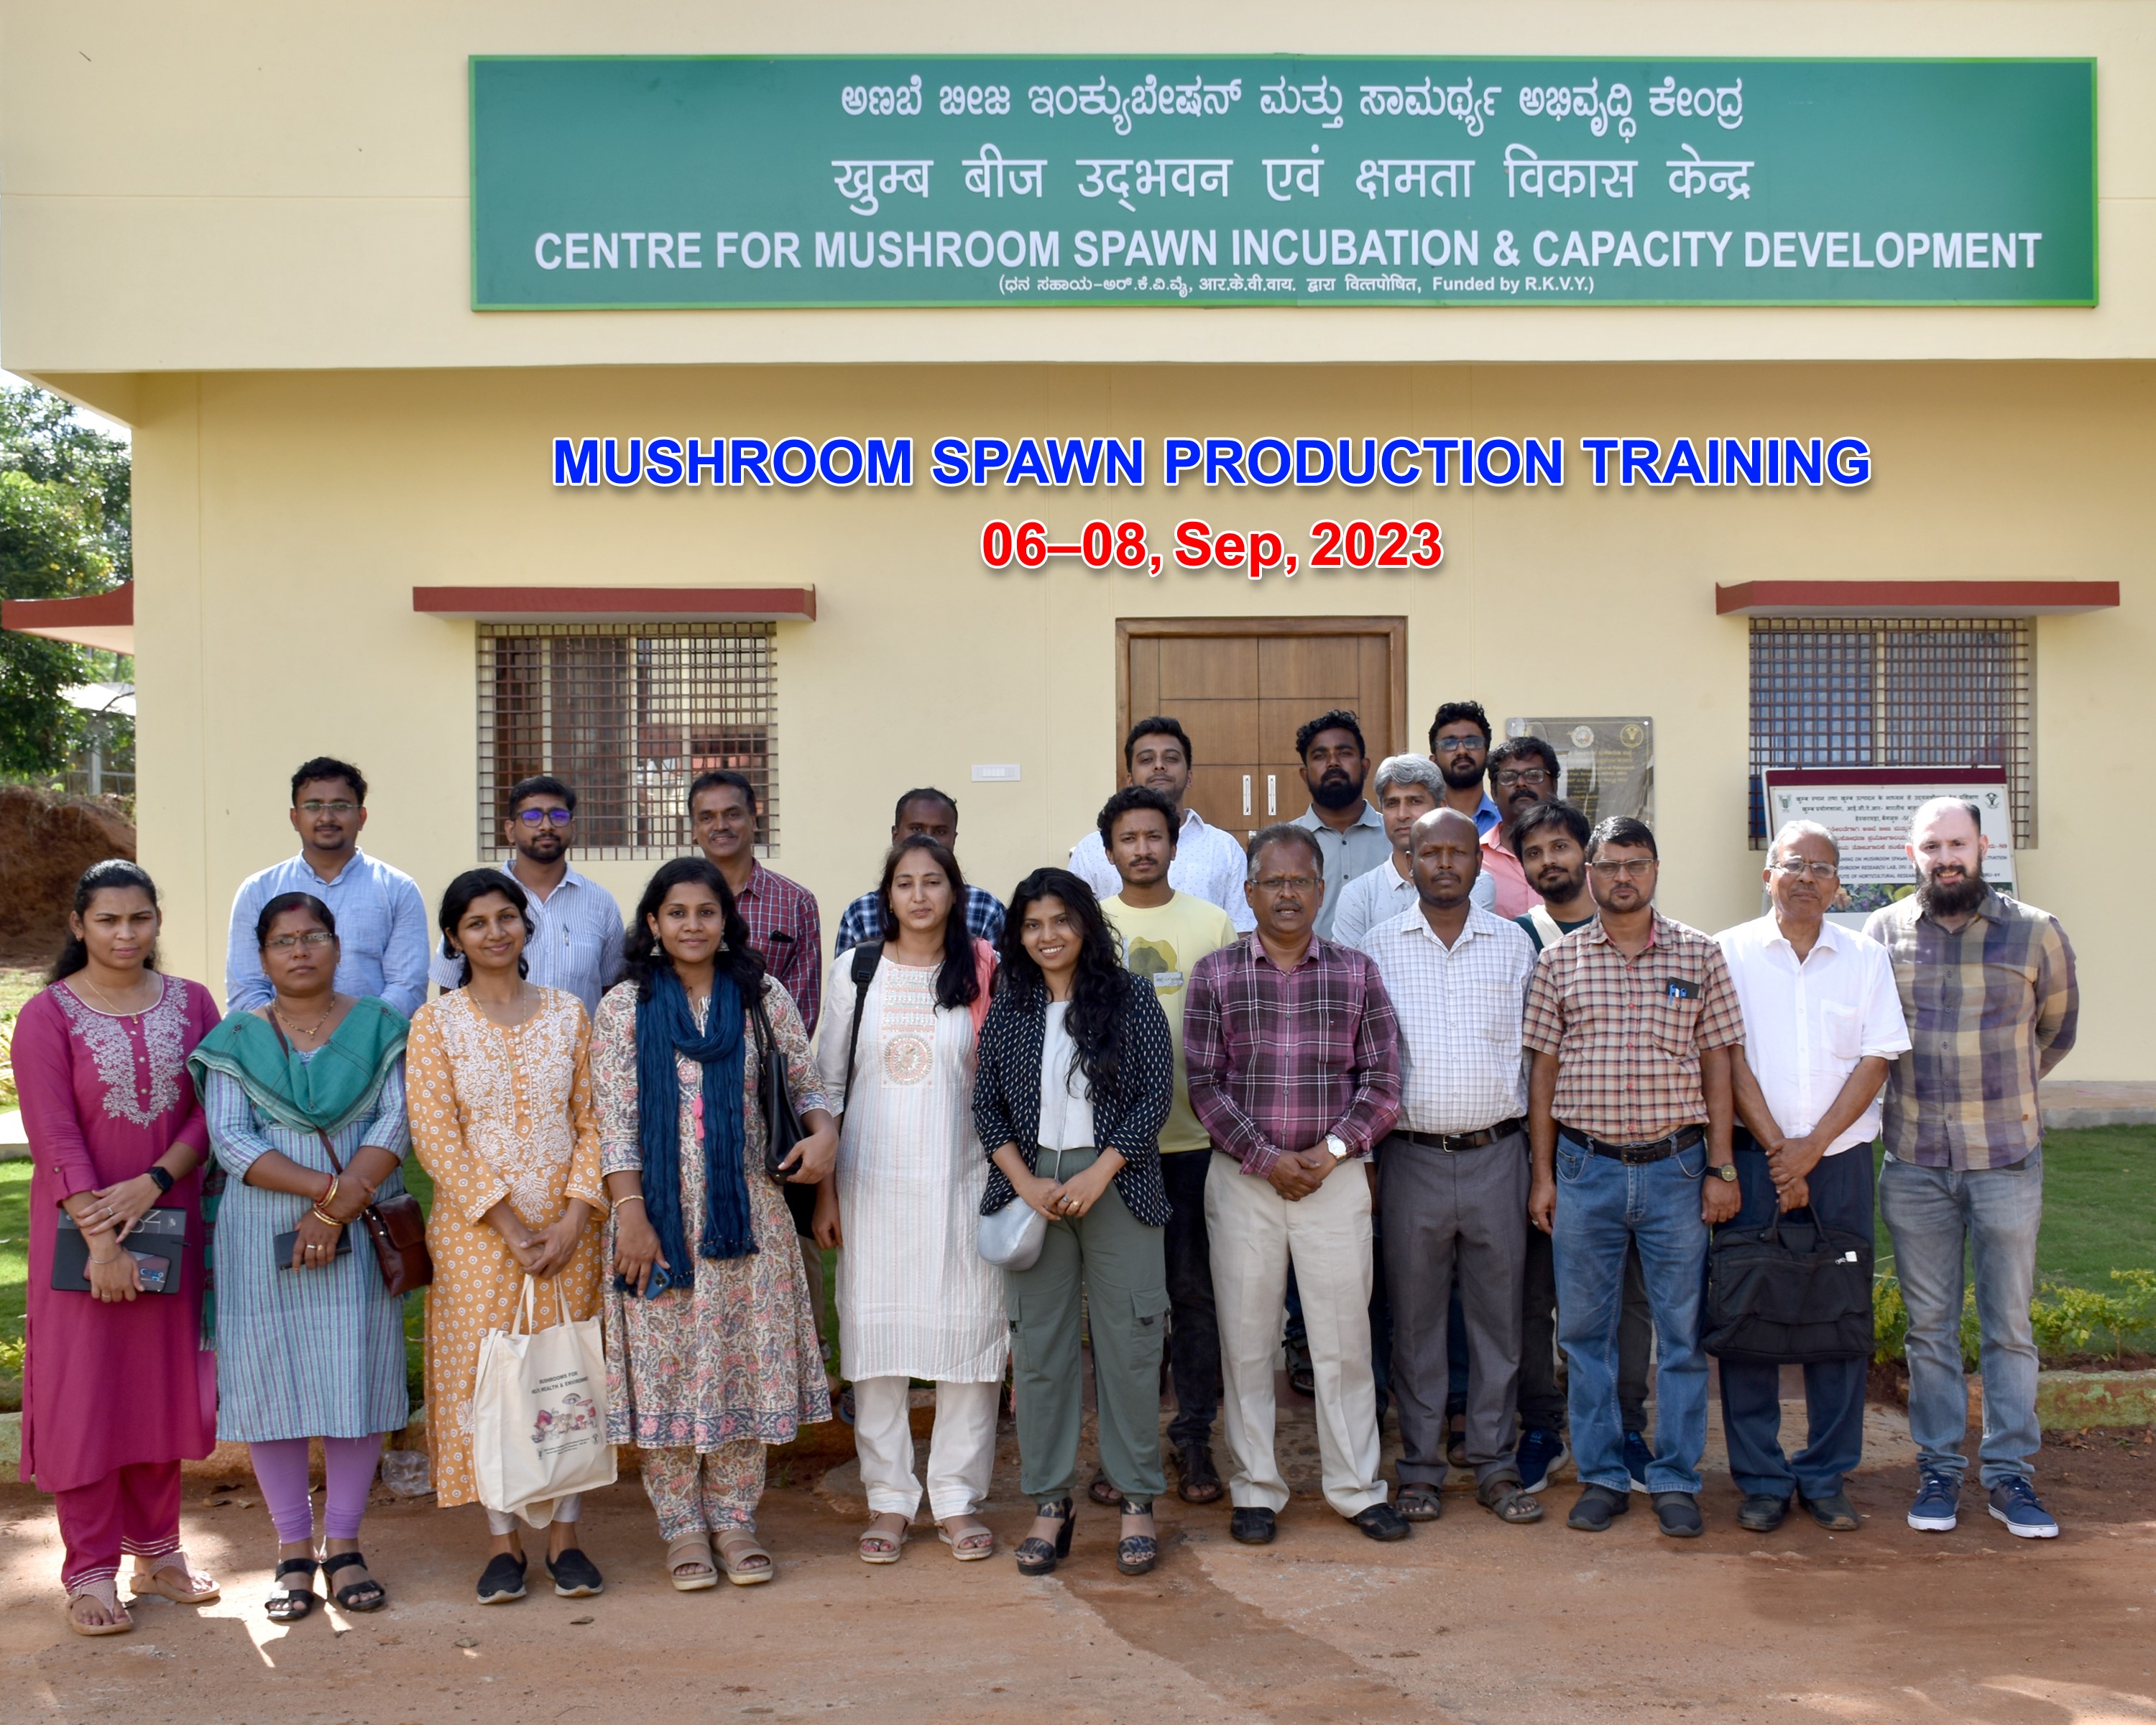 ICAR-IIHR conducts entrepreneurship training on mushroom spawn production and mushroom cultivation from 06th-15th, September May 2023 